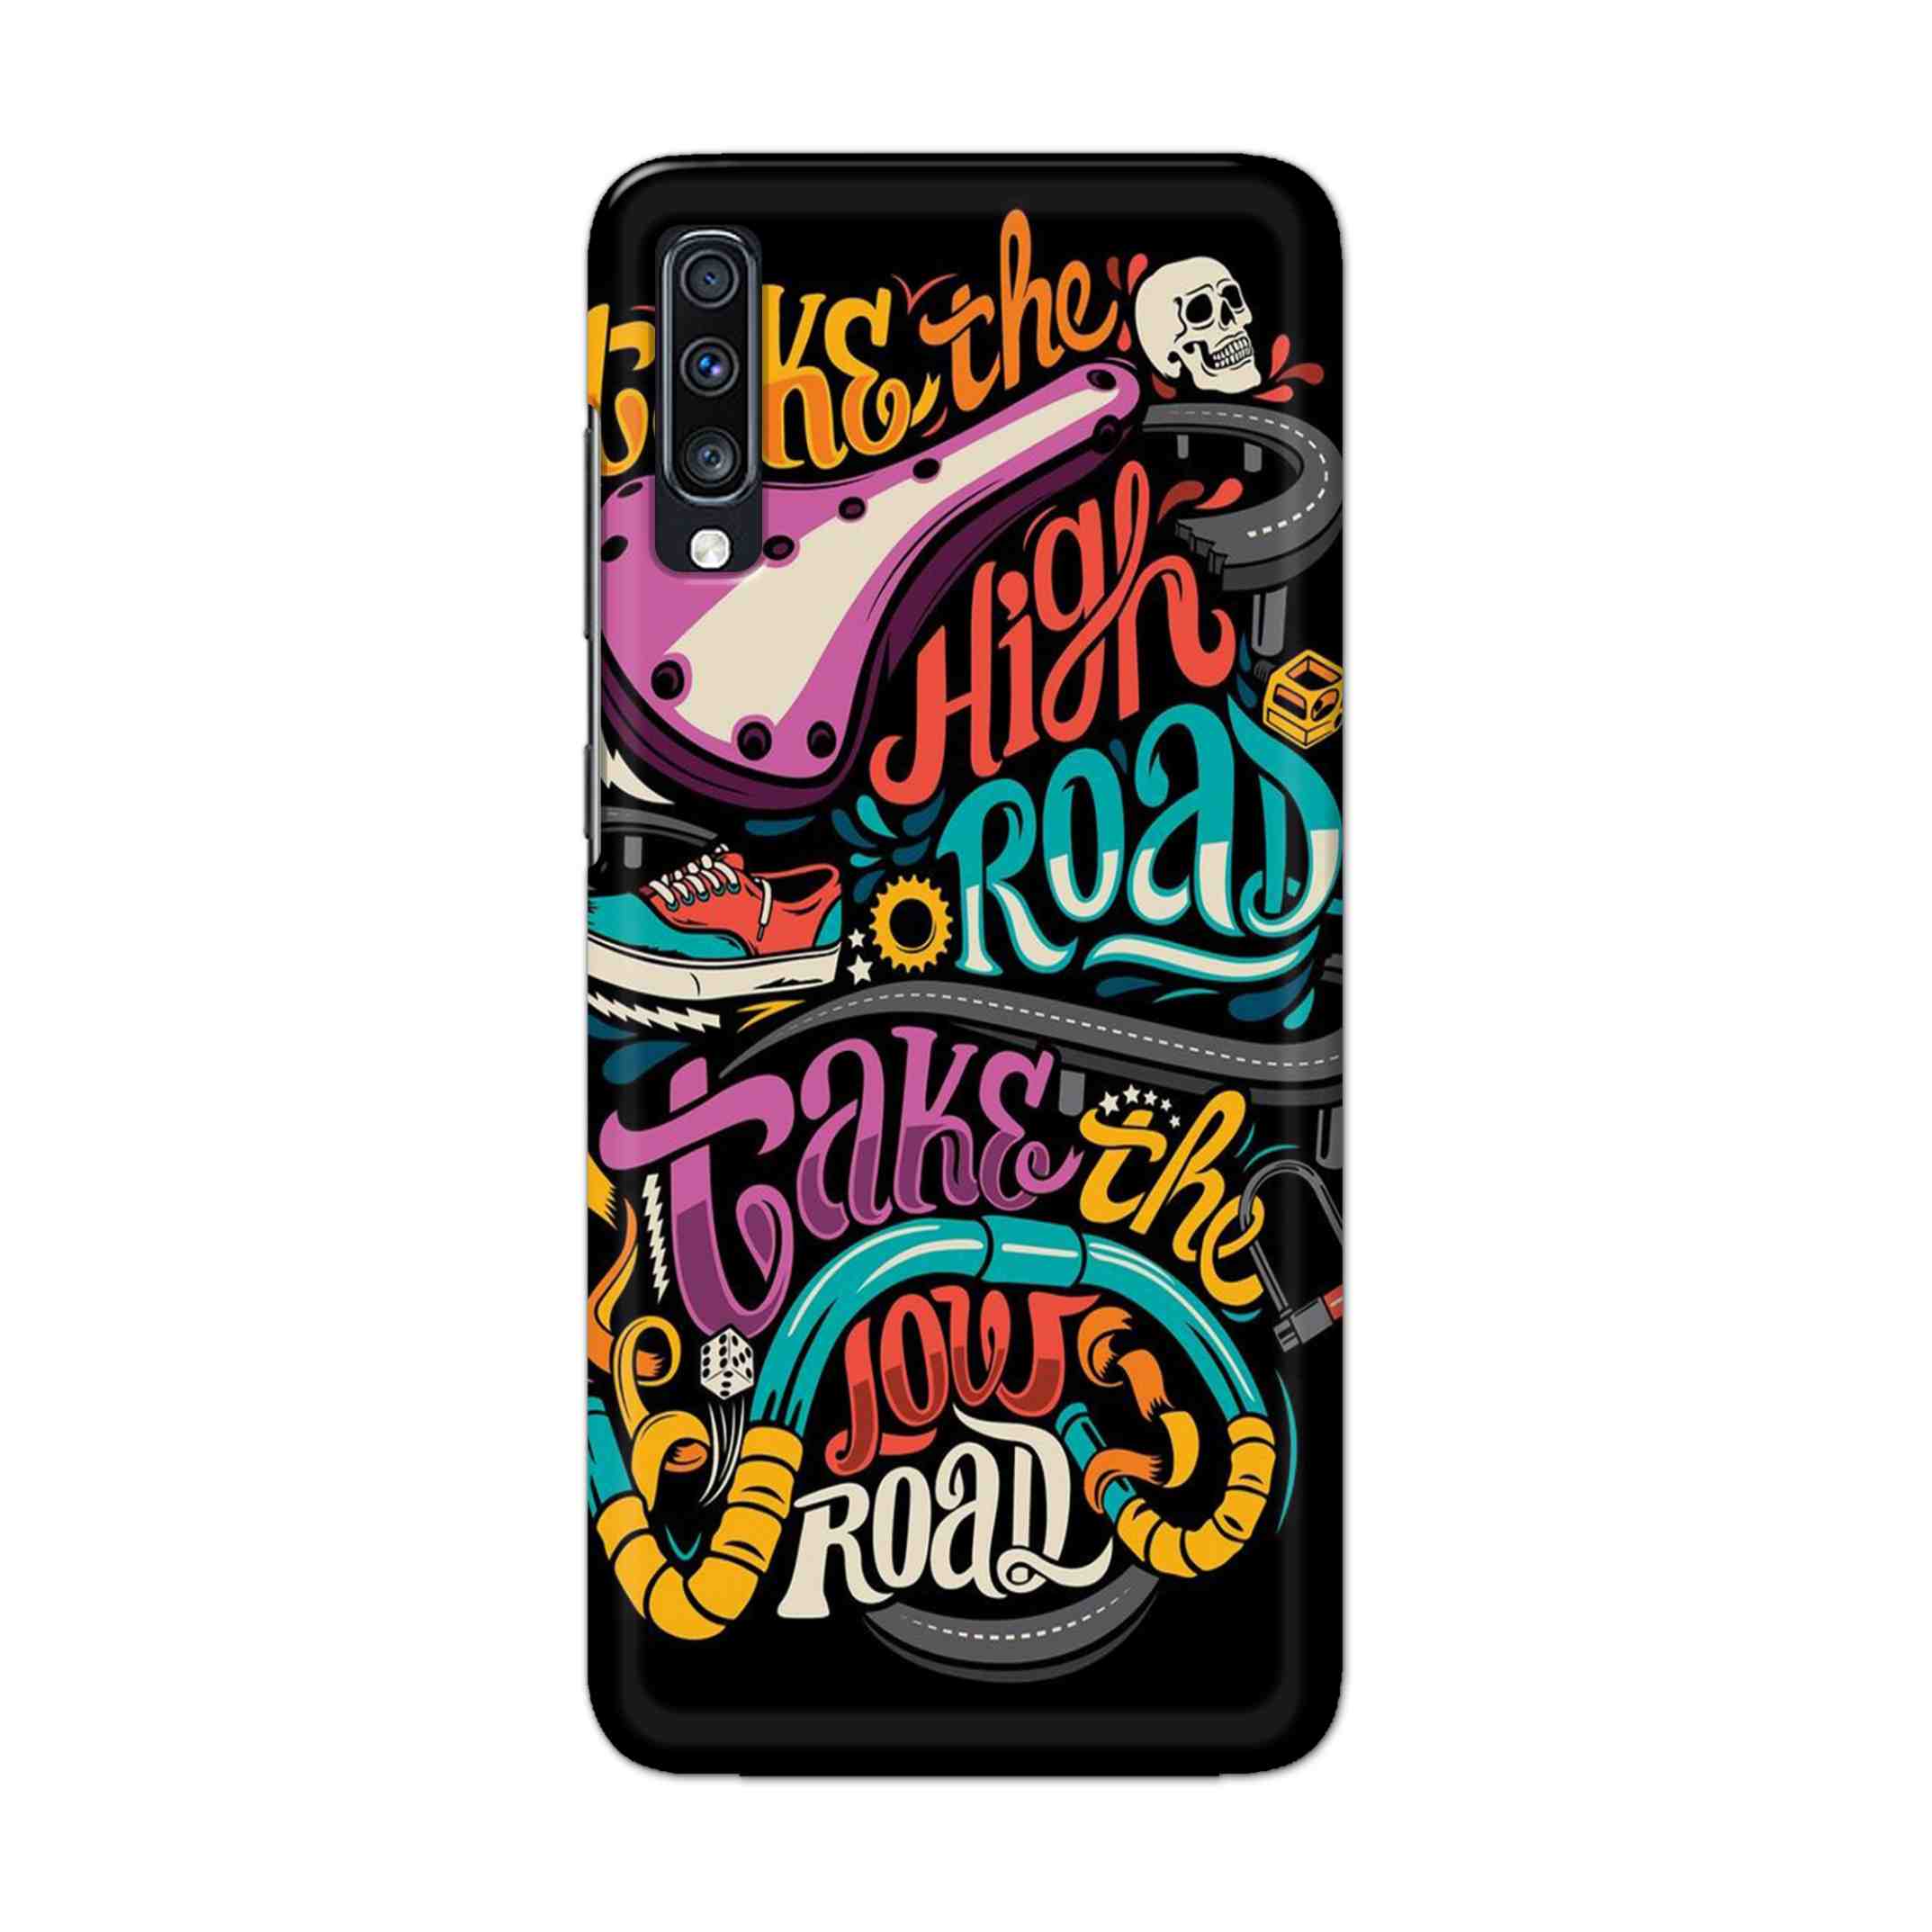 Buy Take The High Road Hard Back Mobile Phone Case Cover For Samsung Galaxy A70 Online